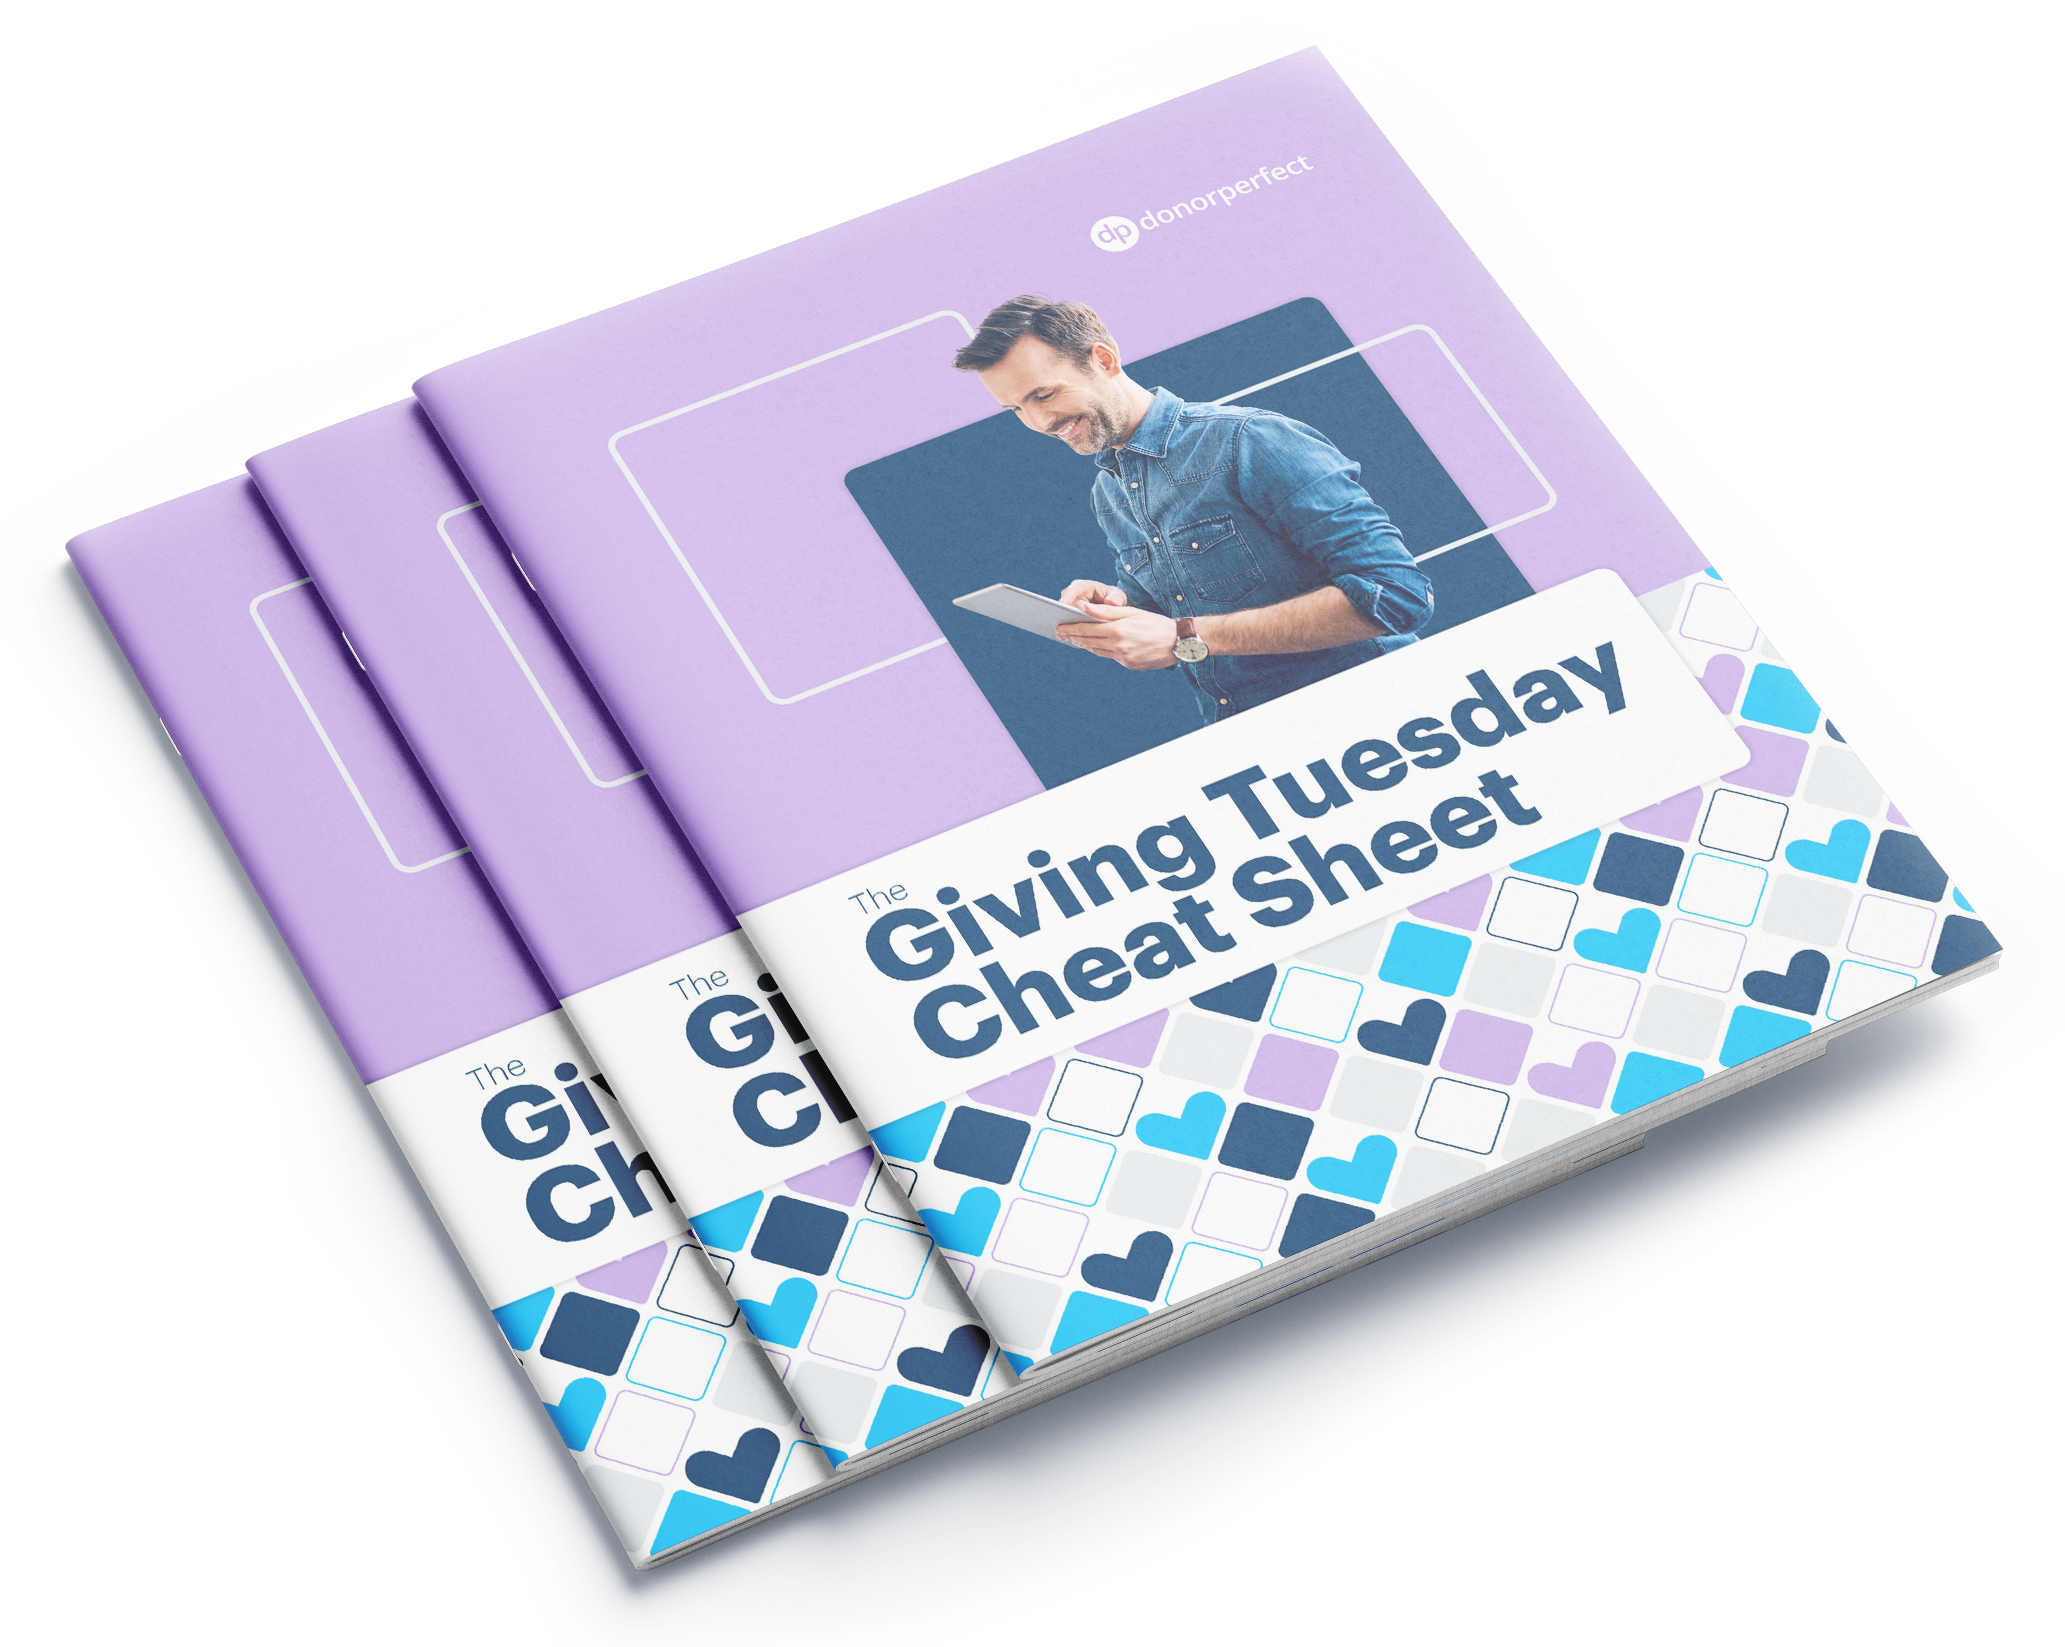 3 copies of the Giving Tuesday Cheatsheet, with the cover depicting the title and a man using a tablet.